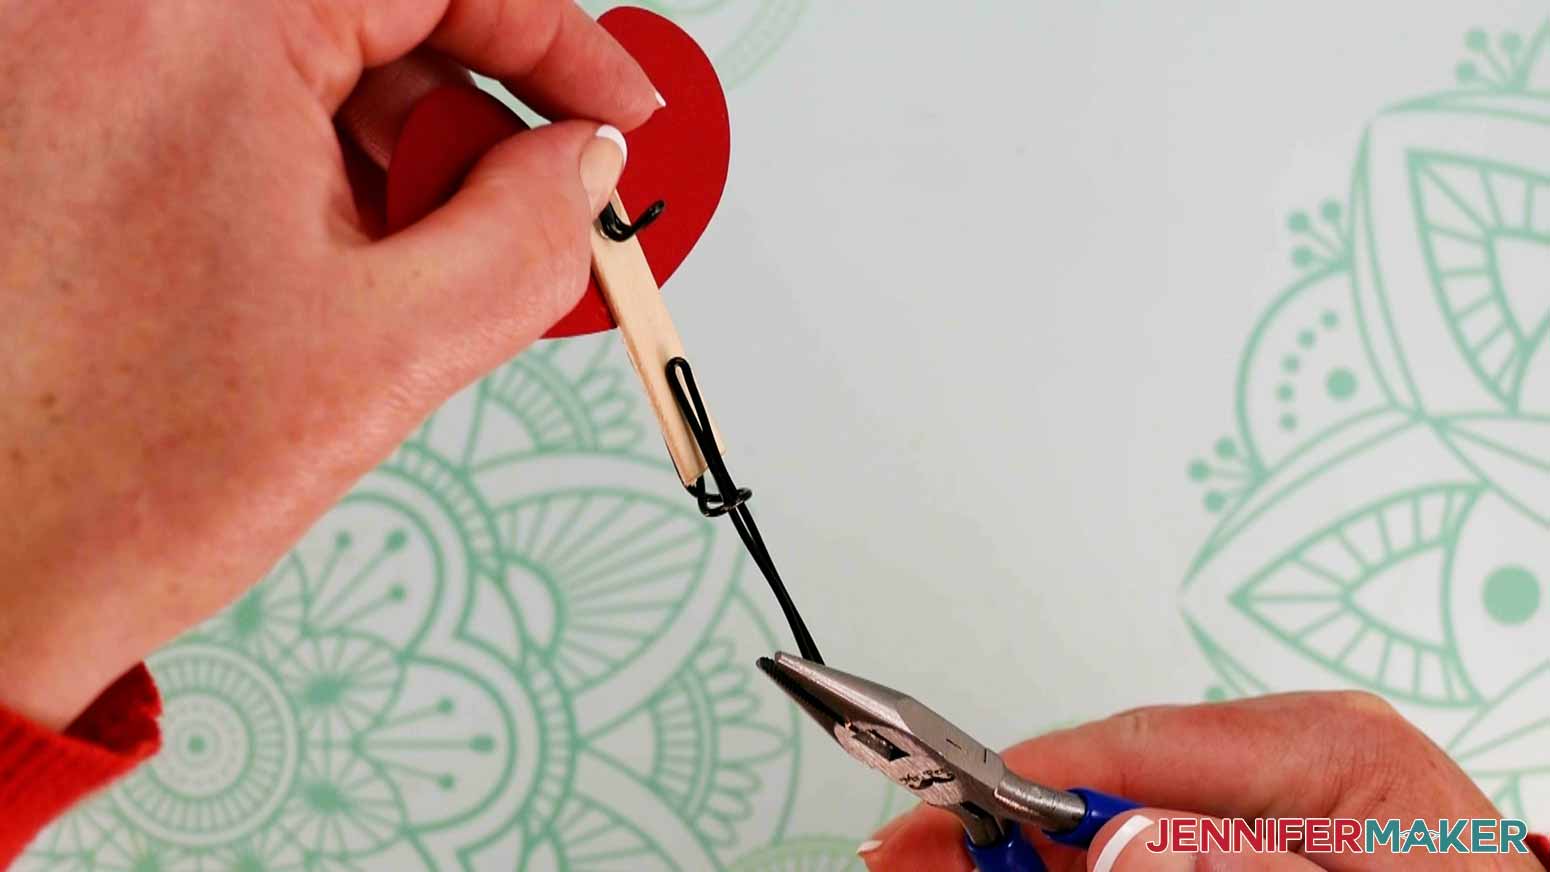 One hand is holding the assembled bottom part of a magic butterfly while another uses needle nosed pliers to hold a shaped piece of wire for the top part. The top wire piece is being shown sliding through the looped wire piece attached to the bottom part of the magic butterfly.